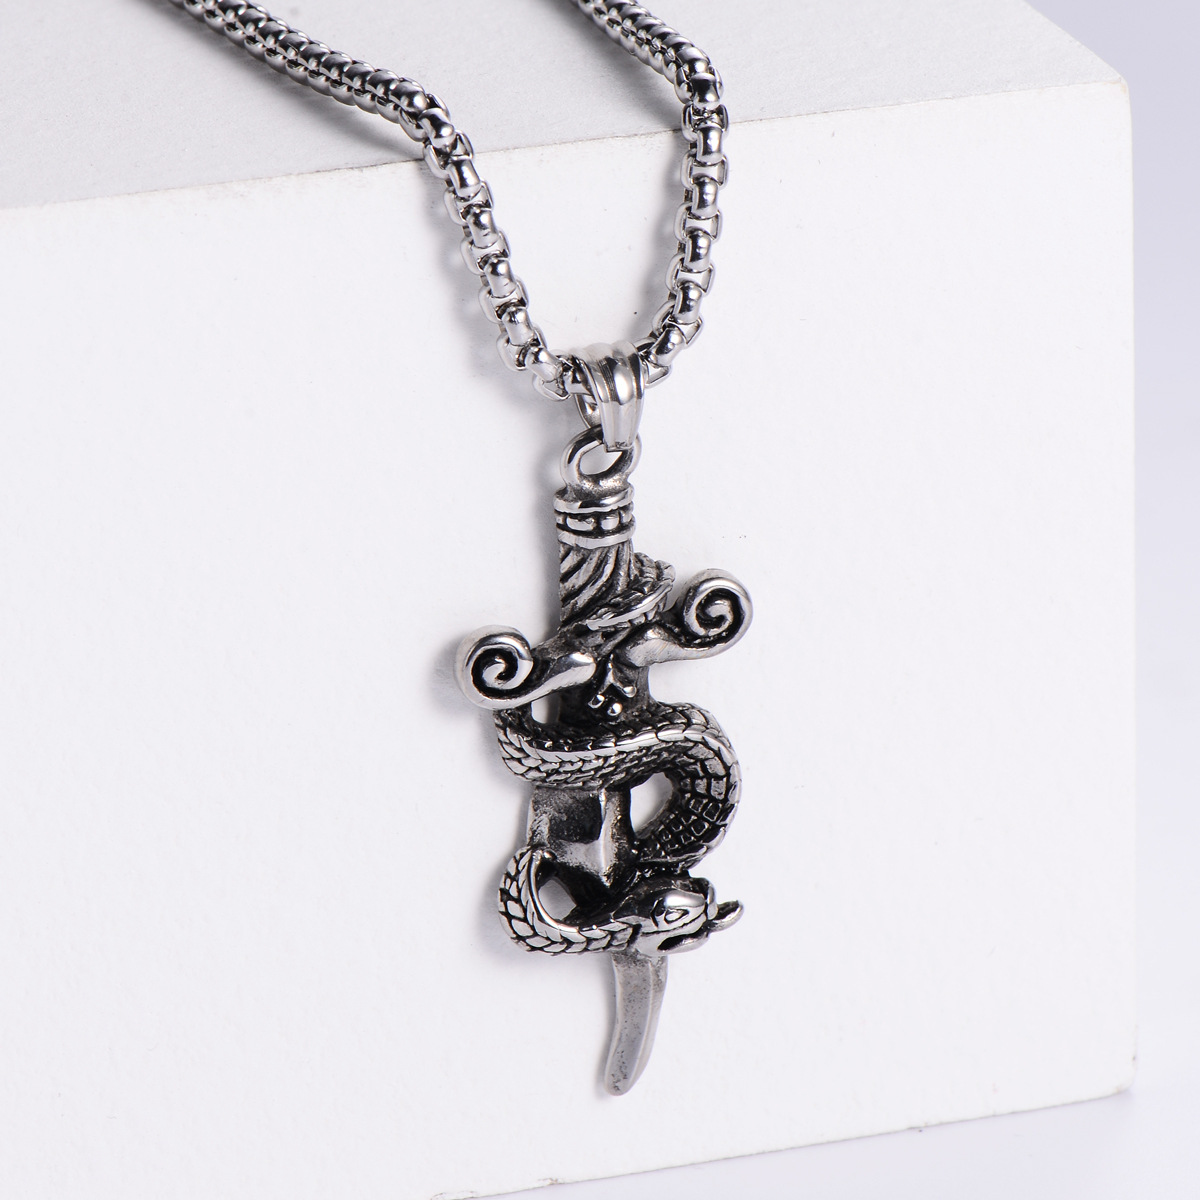 3:【Steel Color】with chain pendant